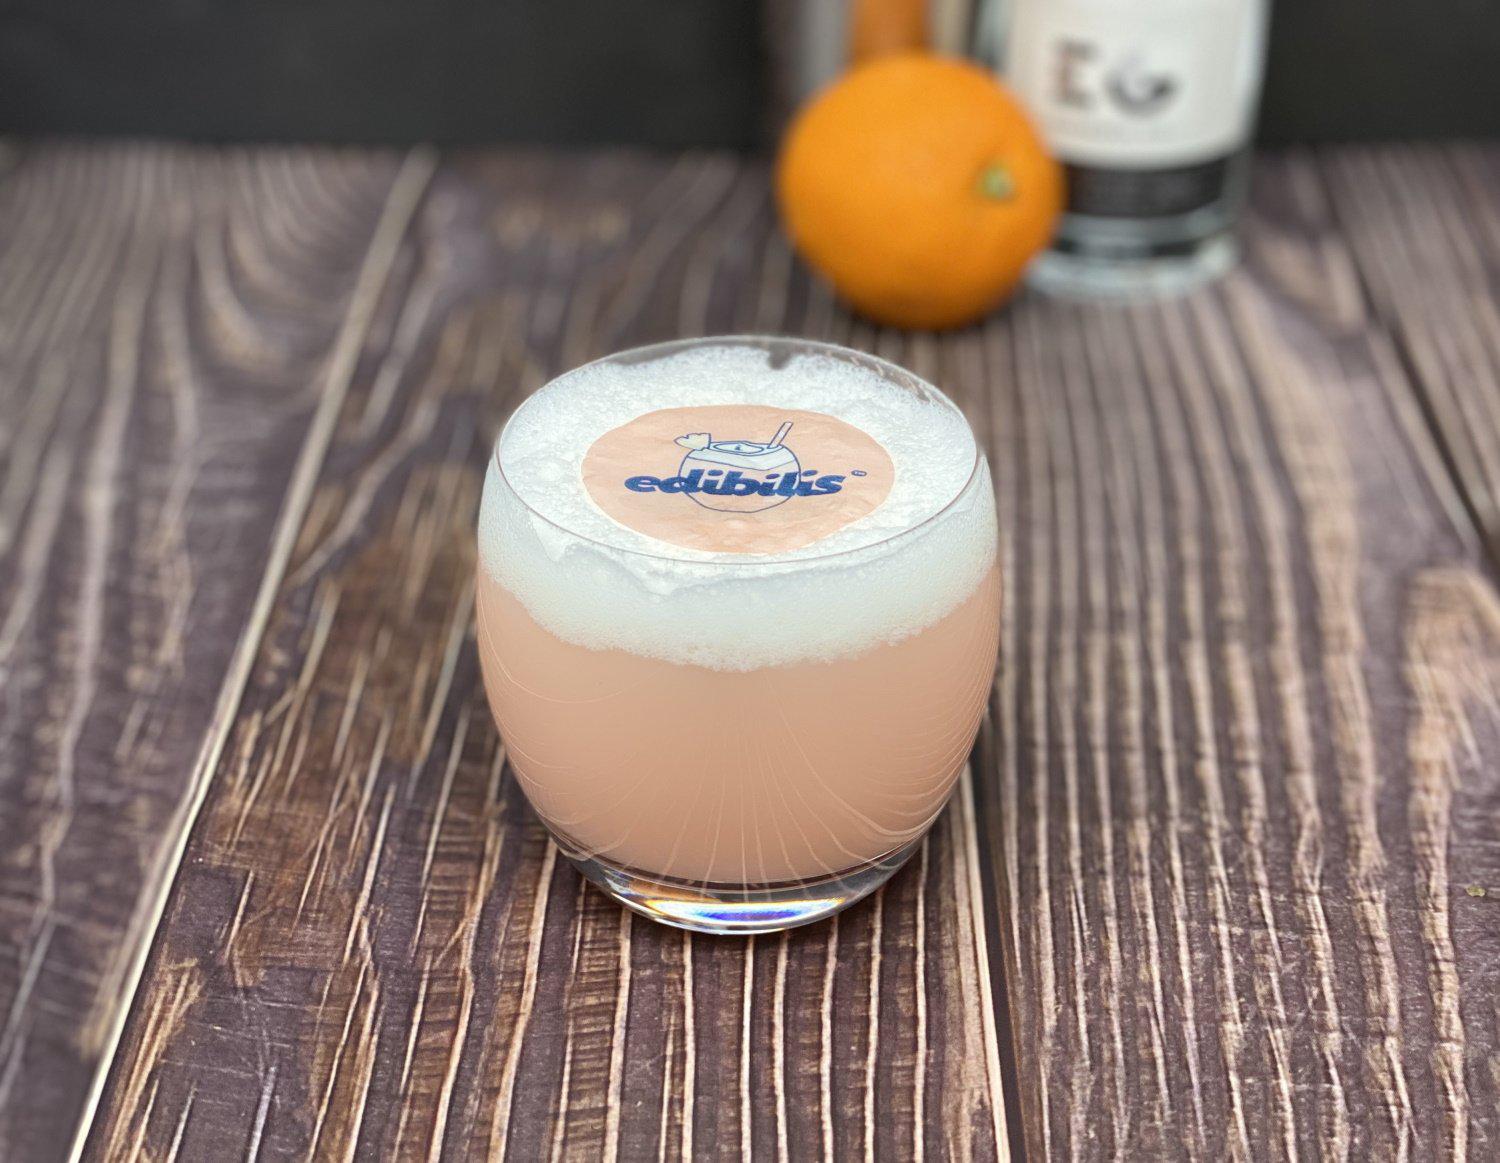 6 x 65mm personalised cocktail toppers-Edible cocktail toppers-Edibilis